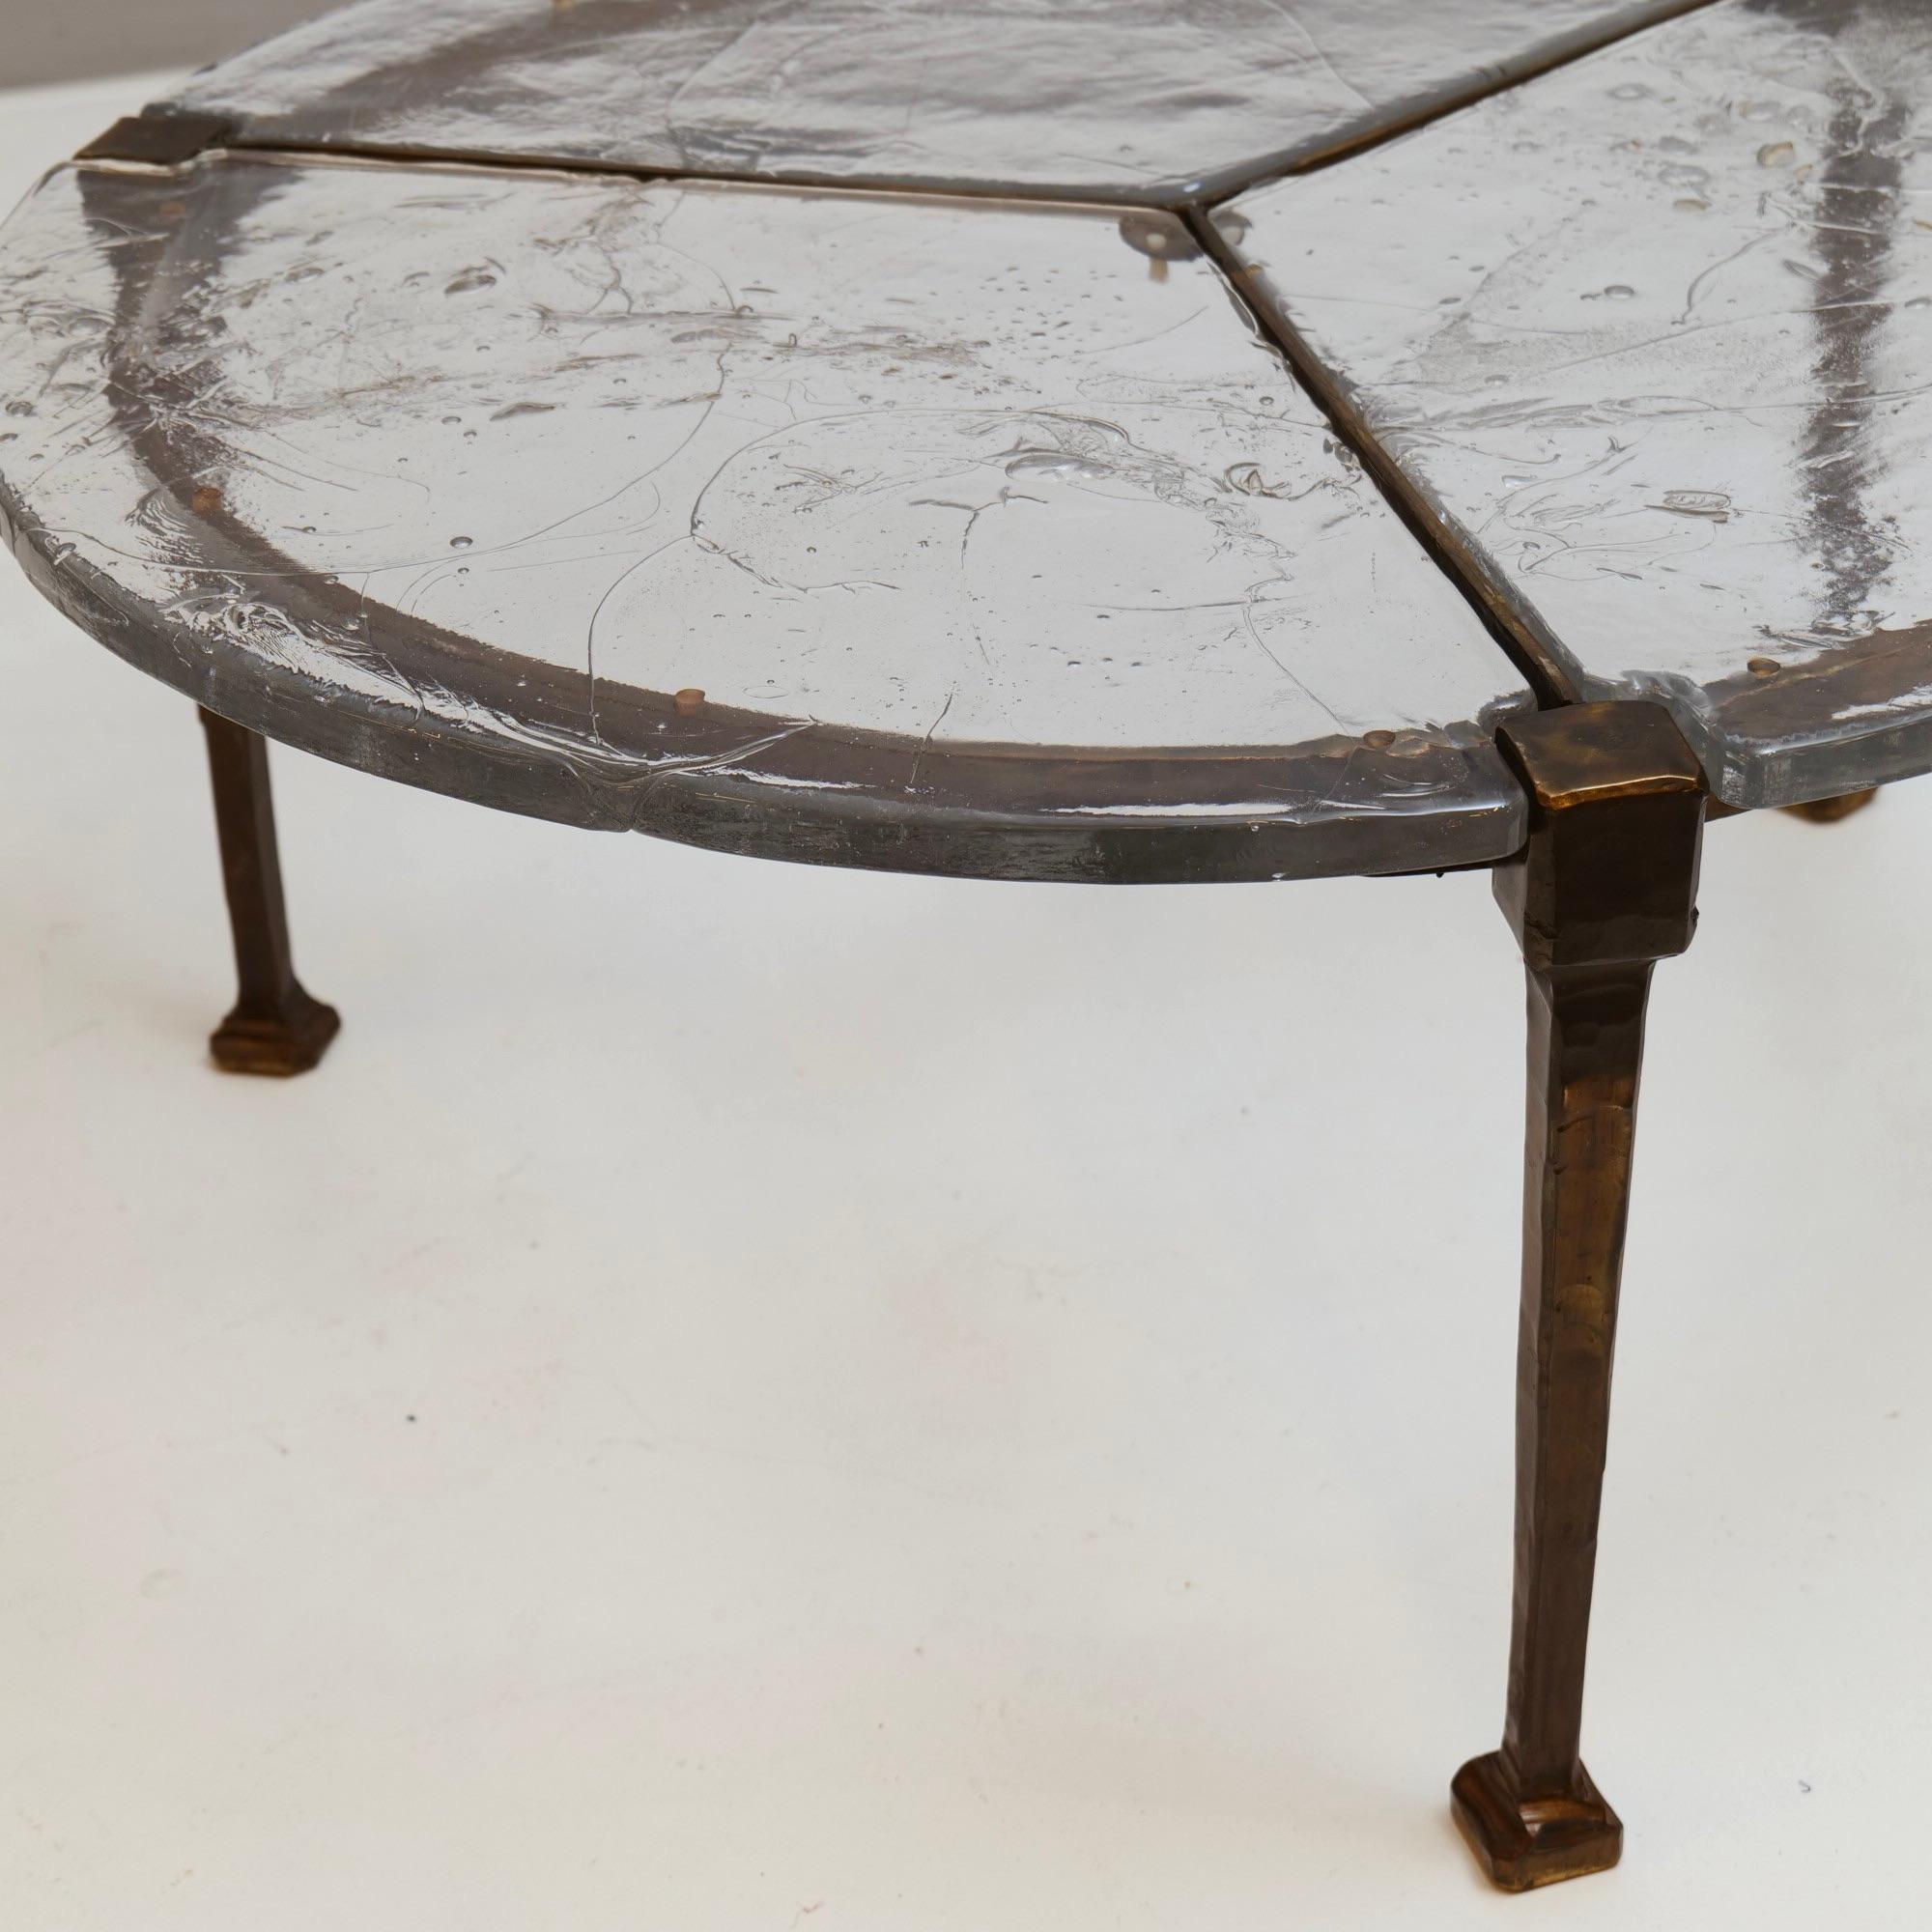 Brutalist forged bronze & glass table by Lothar Klute - 1980s